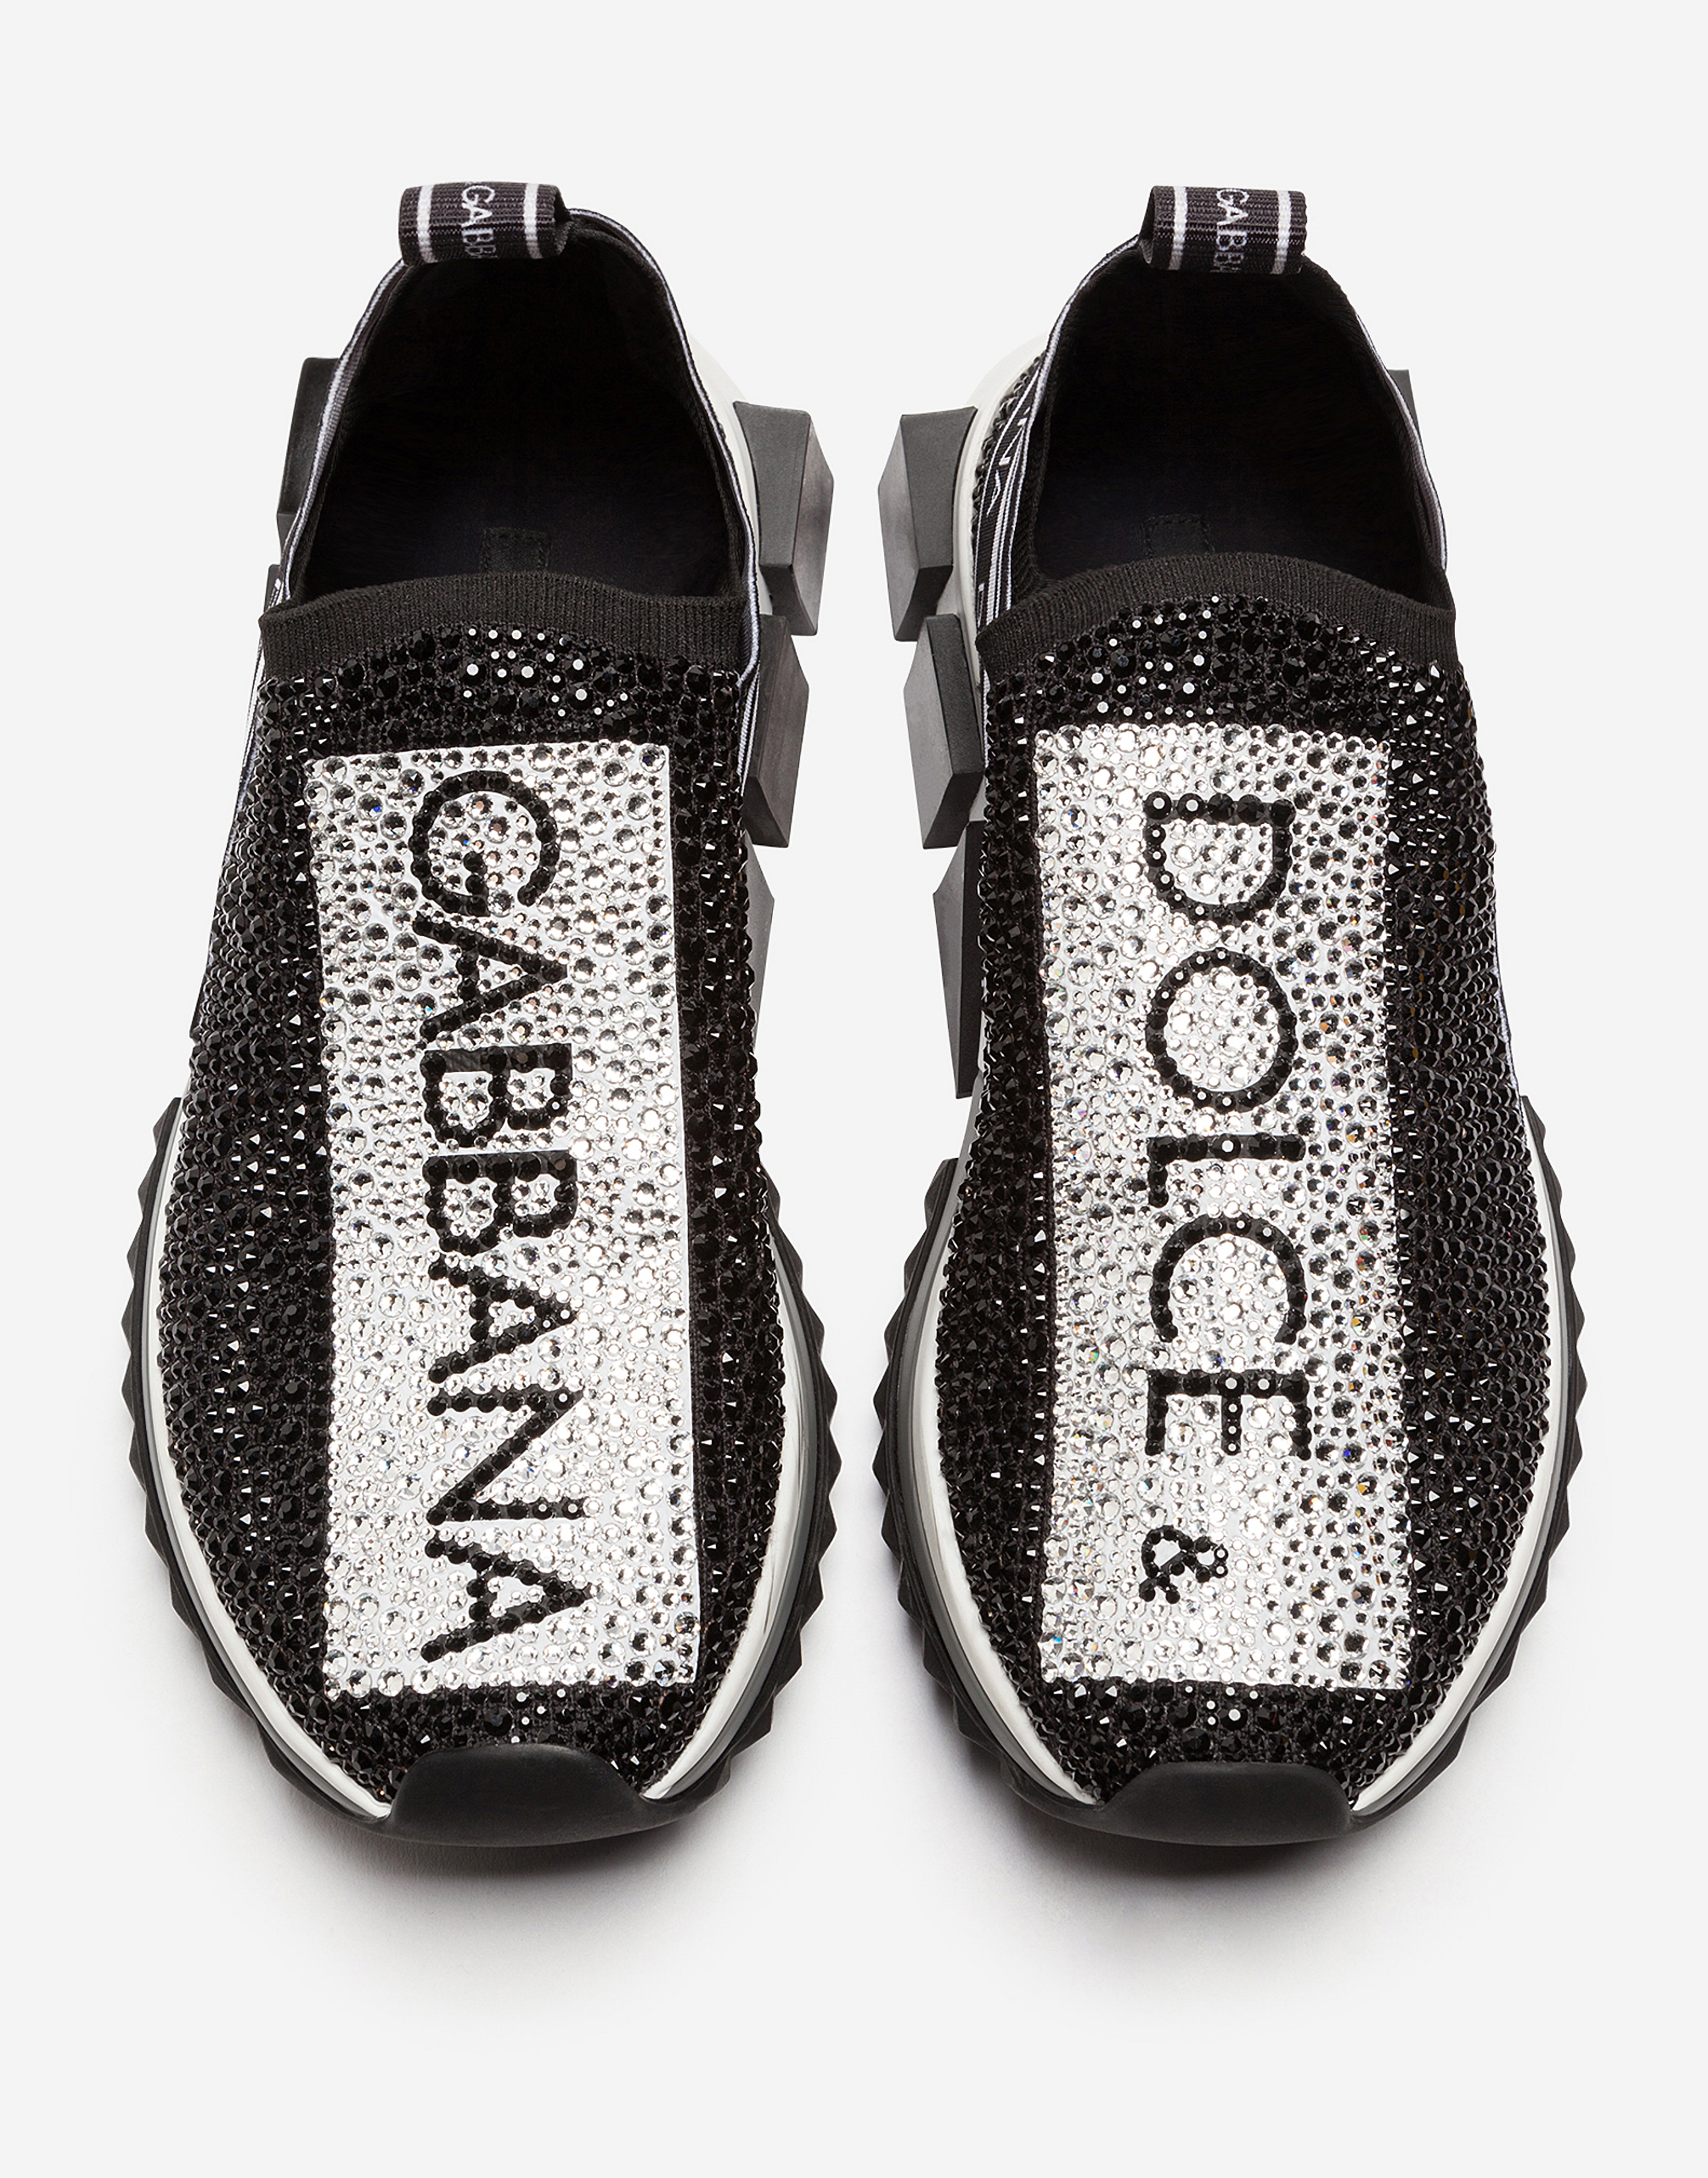 dolce and gabbana women's sneakers